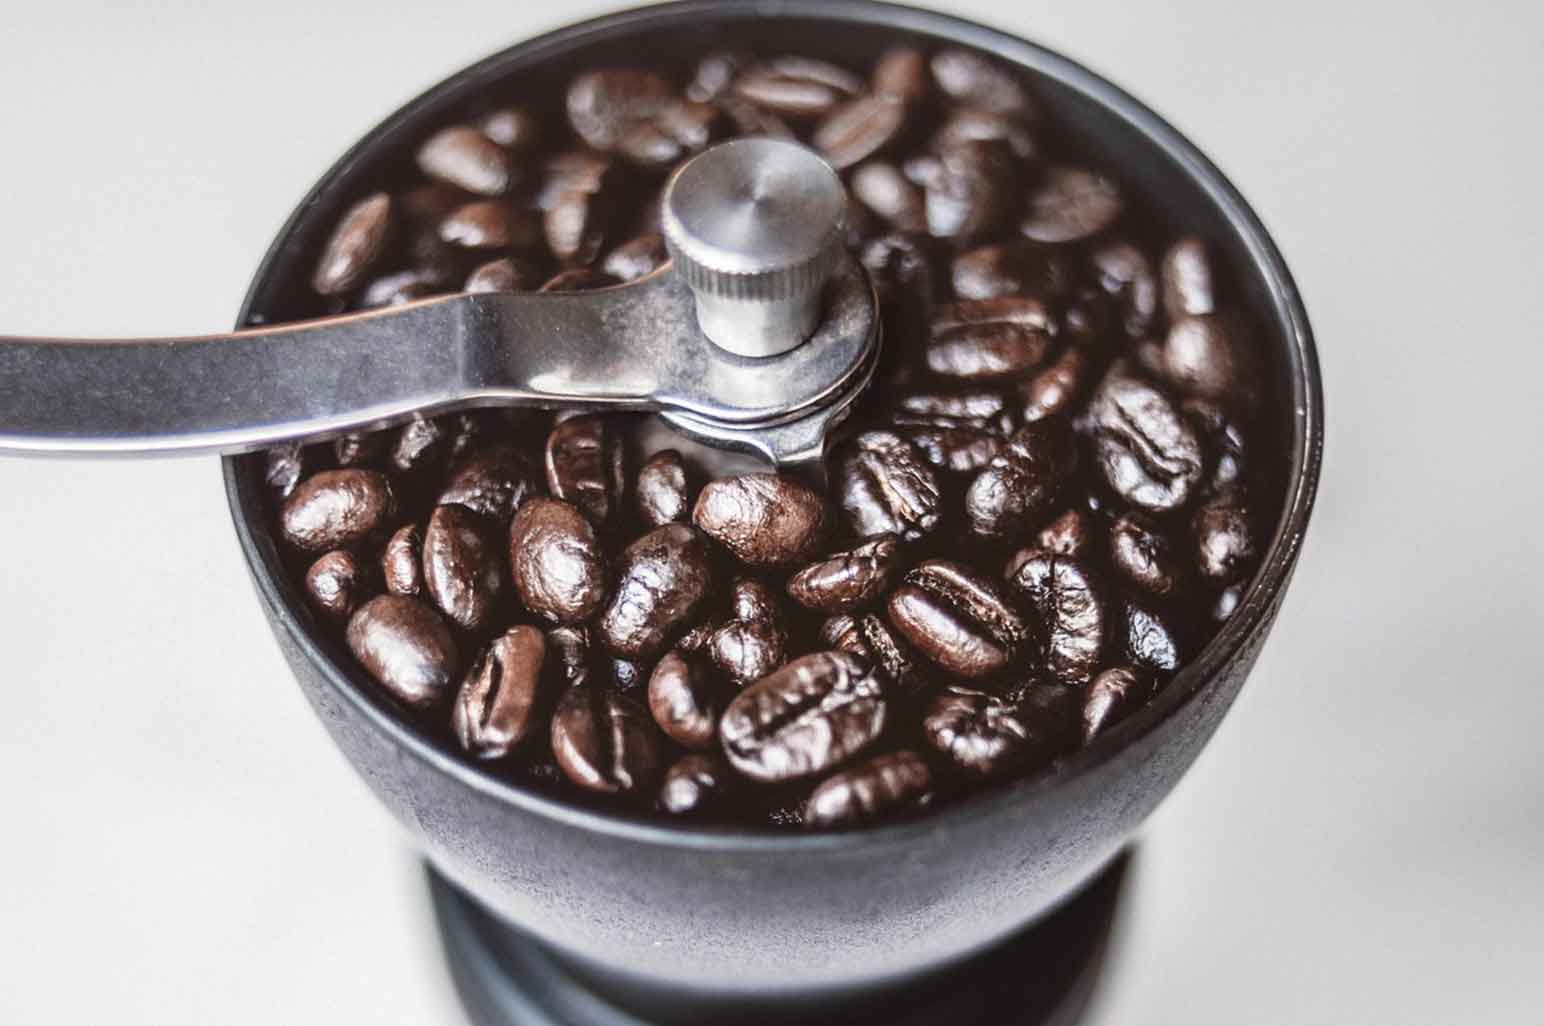 Things to Consider When Buying a Coffee Grinder